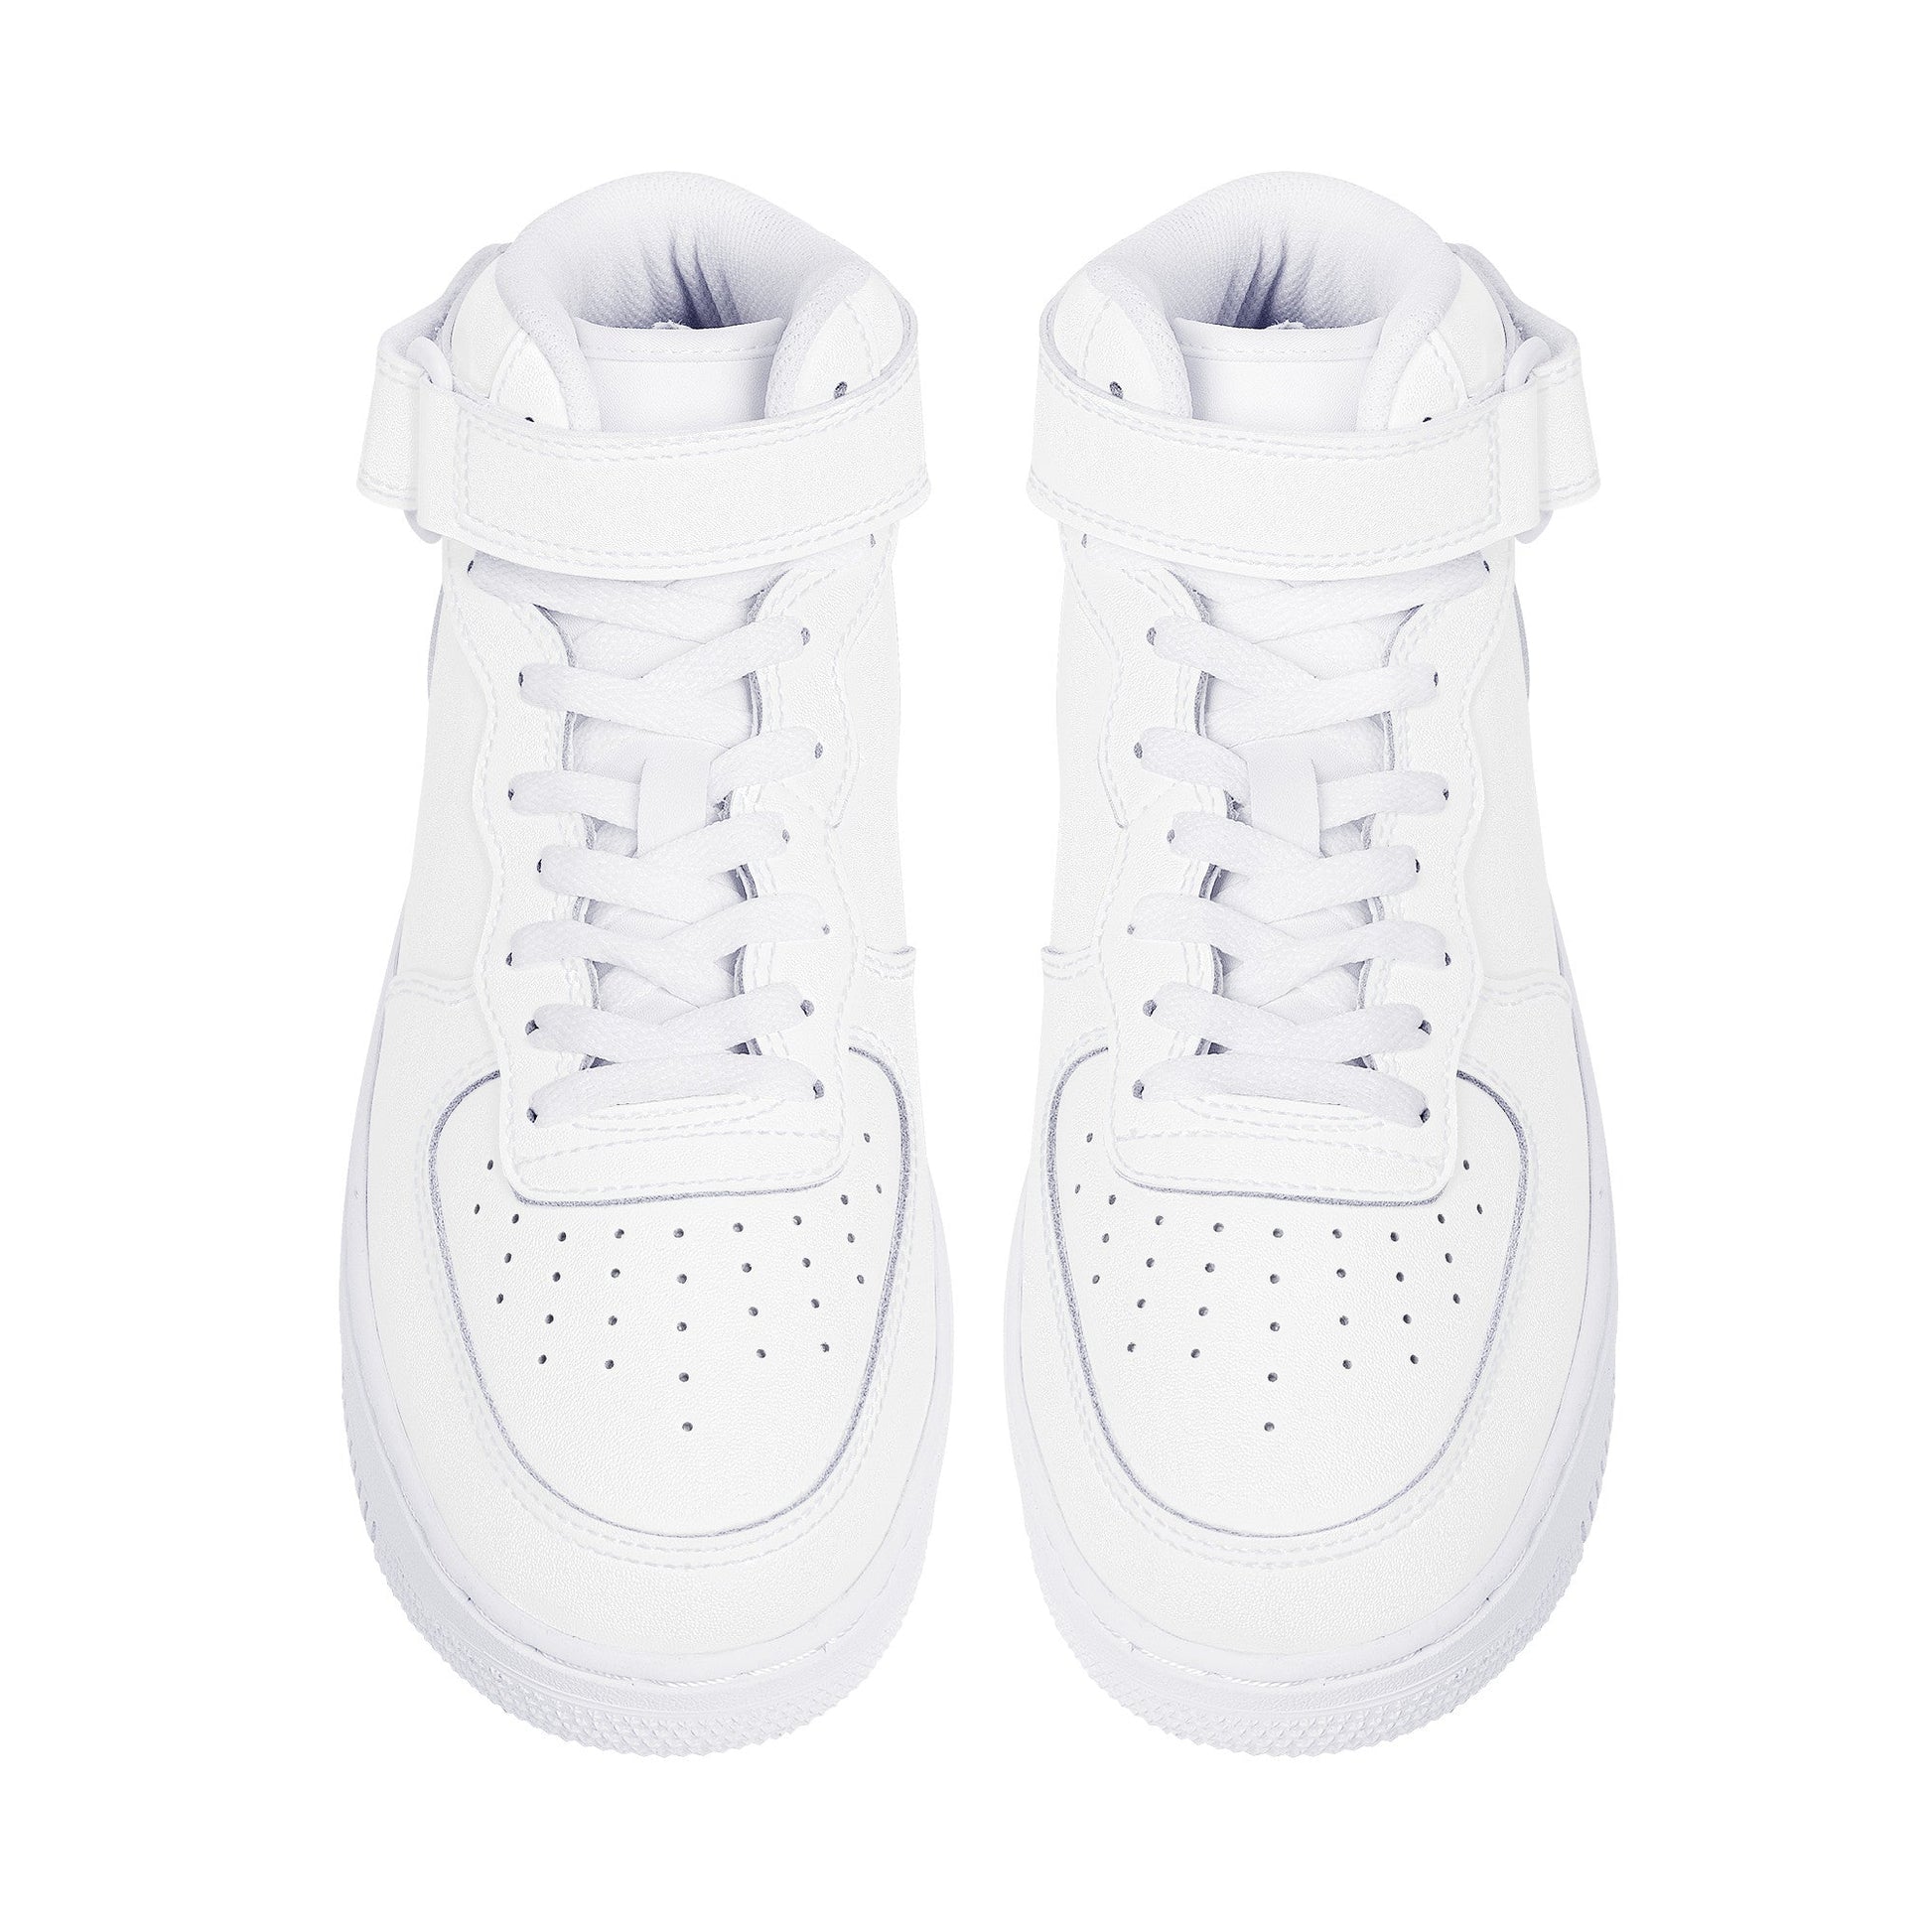 Custom High Top Unisex Sneakers -SF F9 Colloid Colors 